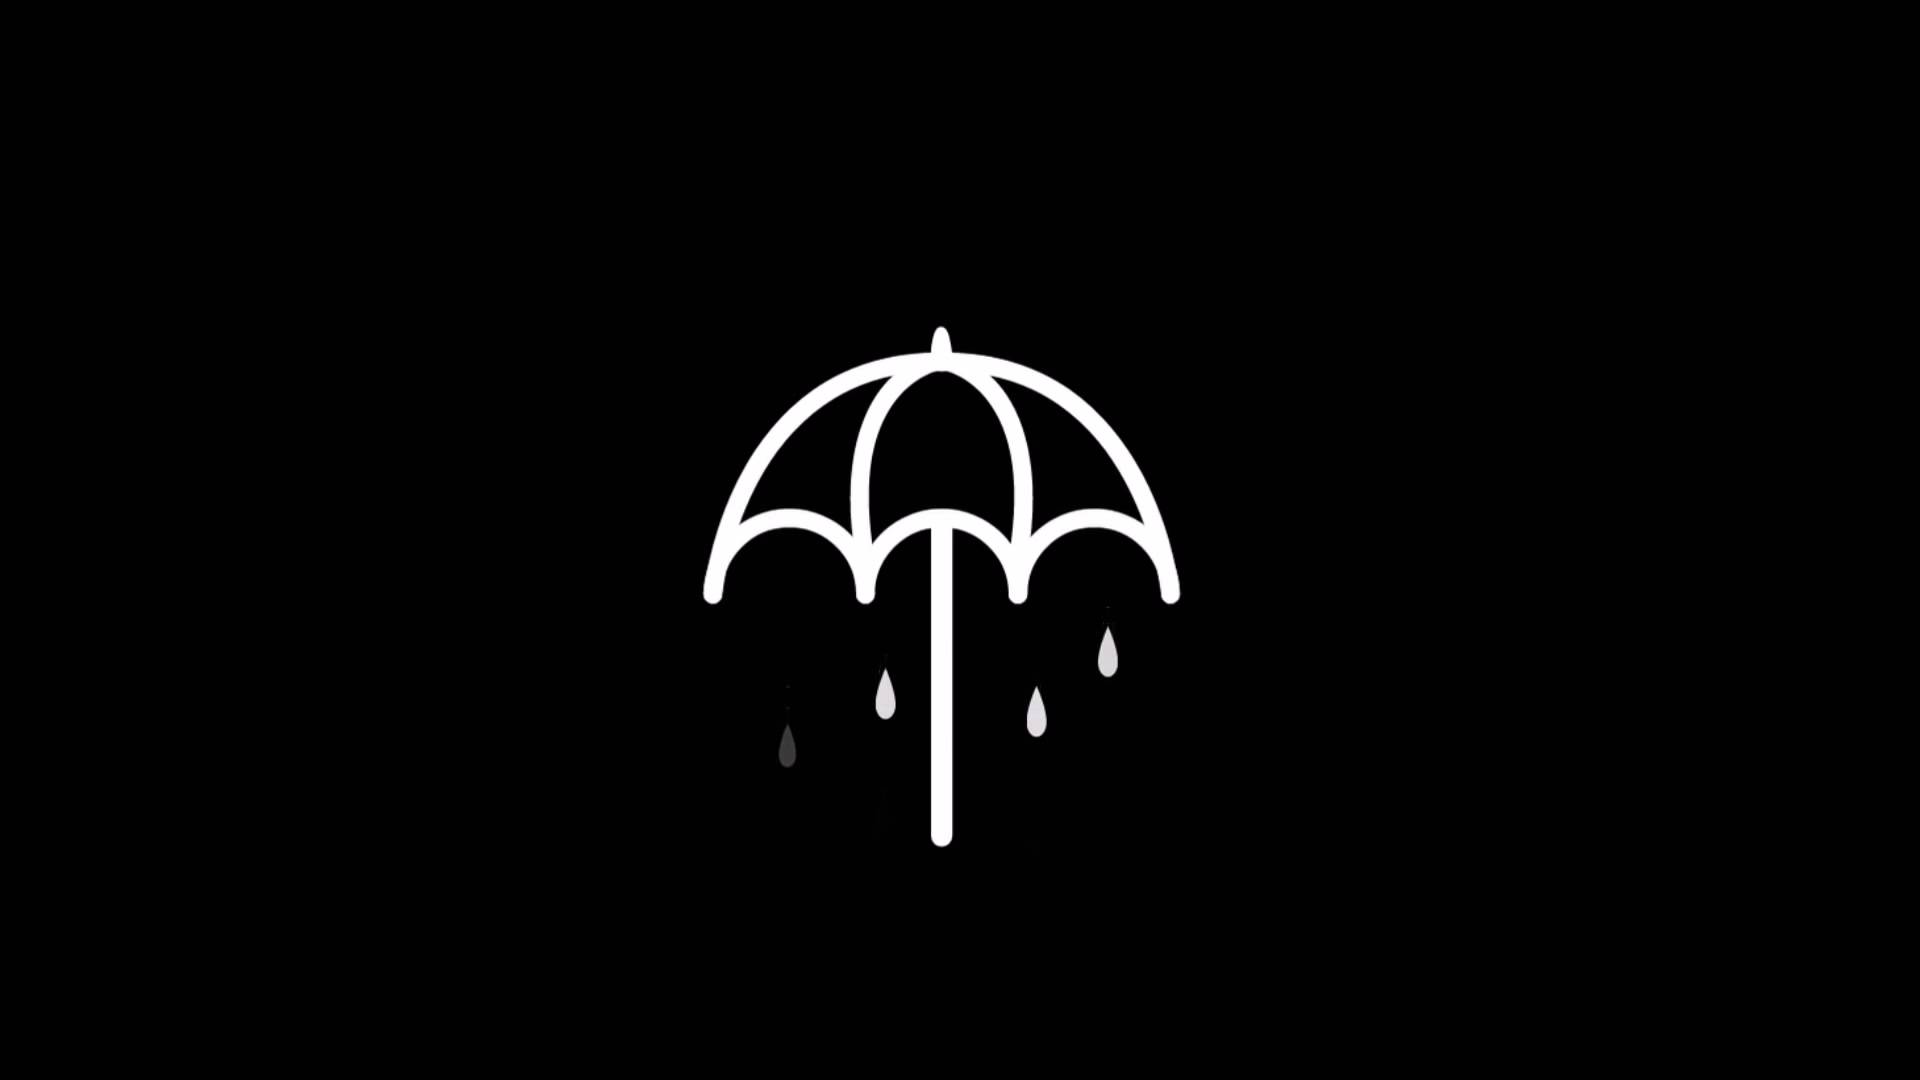 Student Music Review: Bring Me the Horizon - Suicide Season